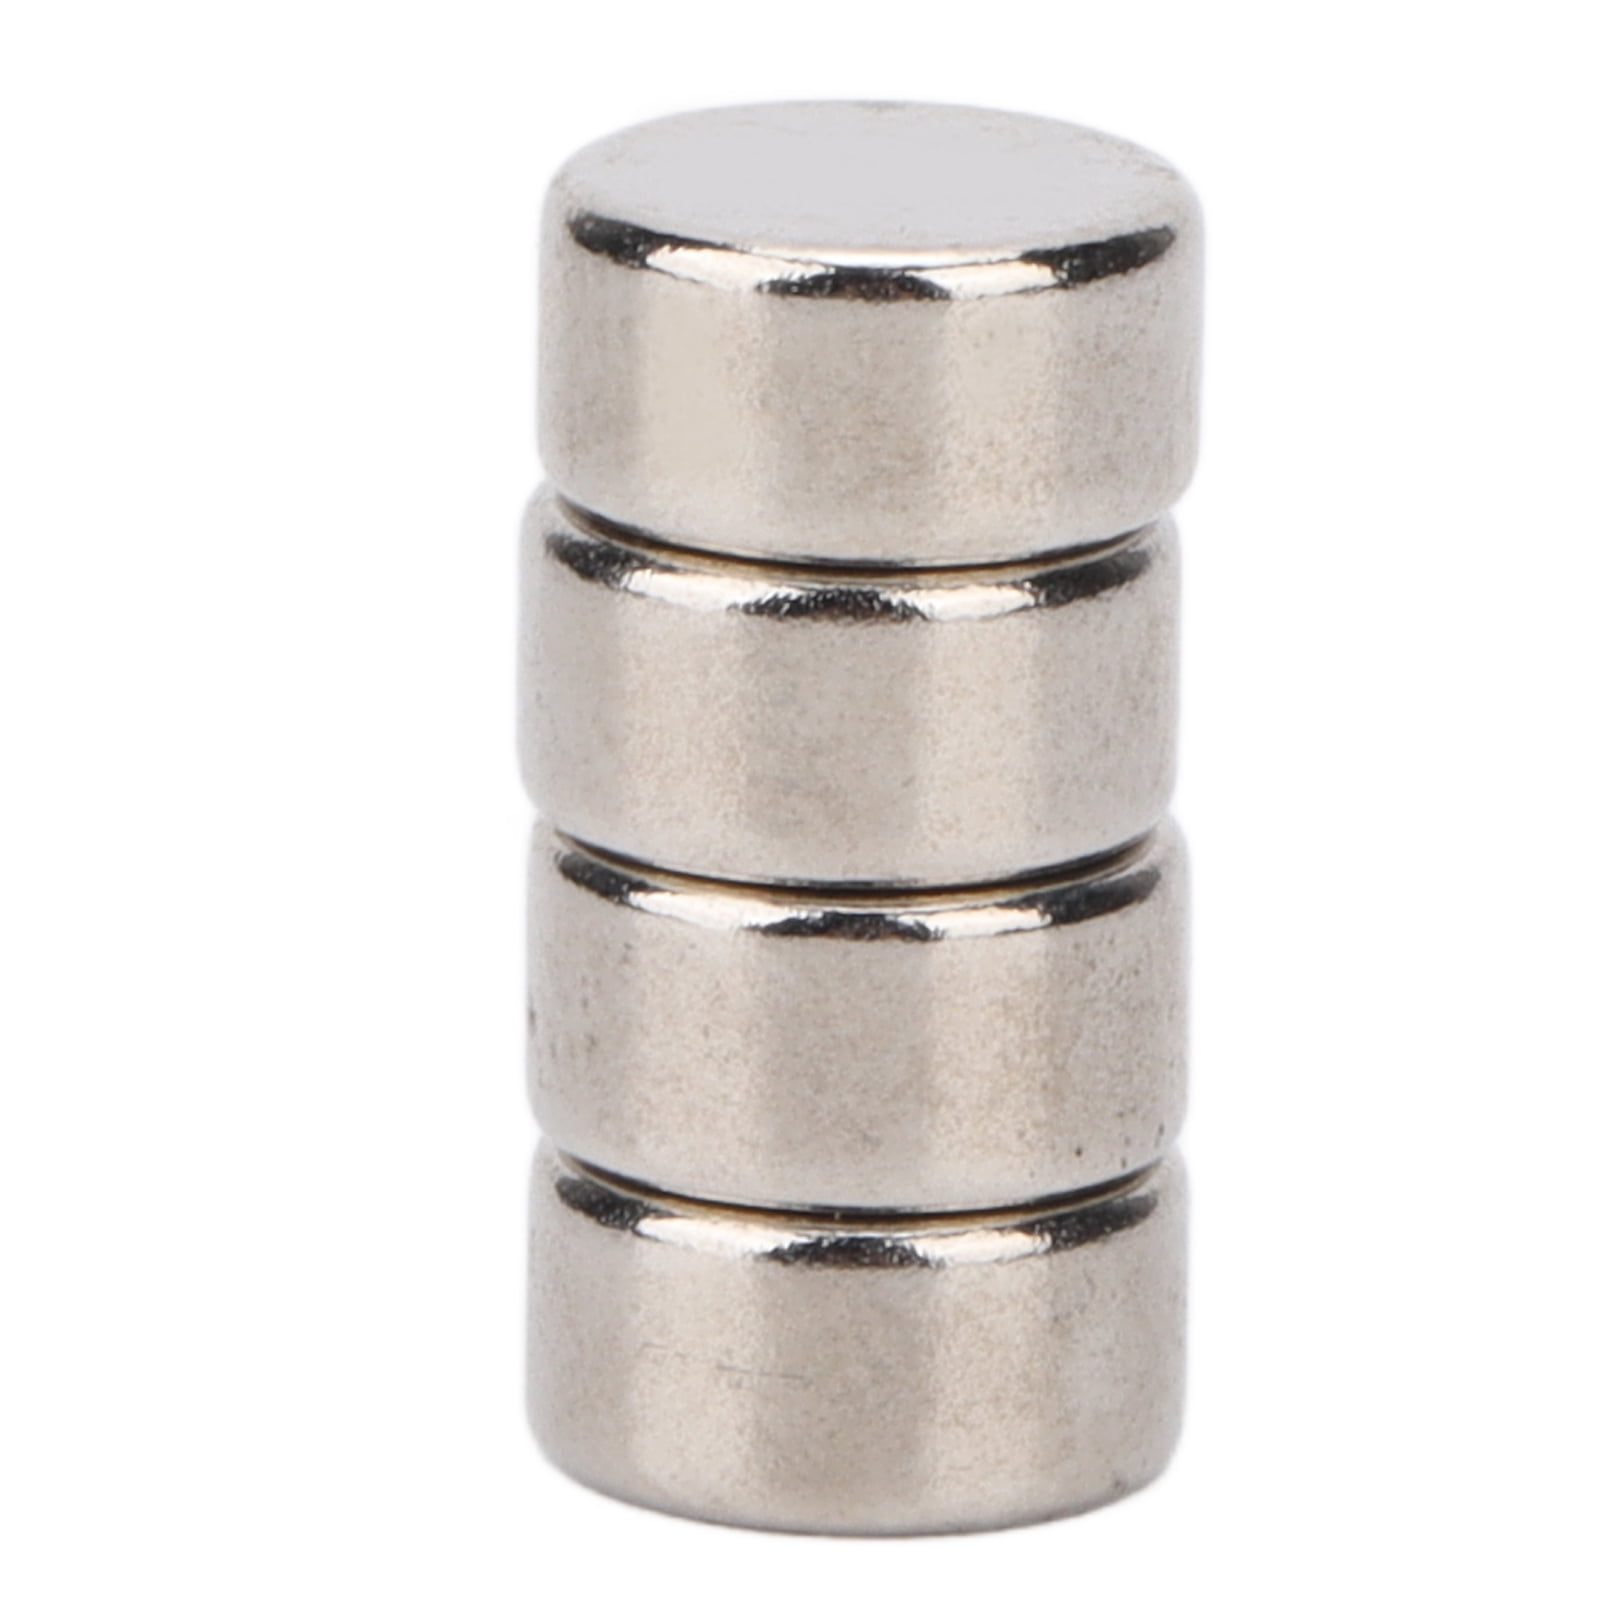 Industrial Magnets, Round 100PCS Super Strong Neodymium Magnets  Multifunctional Silver For Daily Life 8 X 4mm / 0.3 X 0.16in 